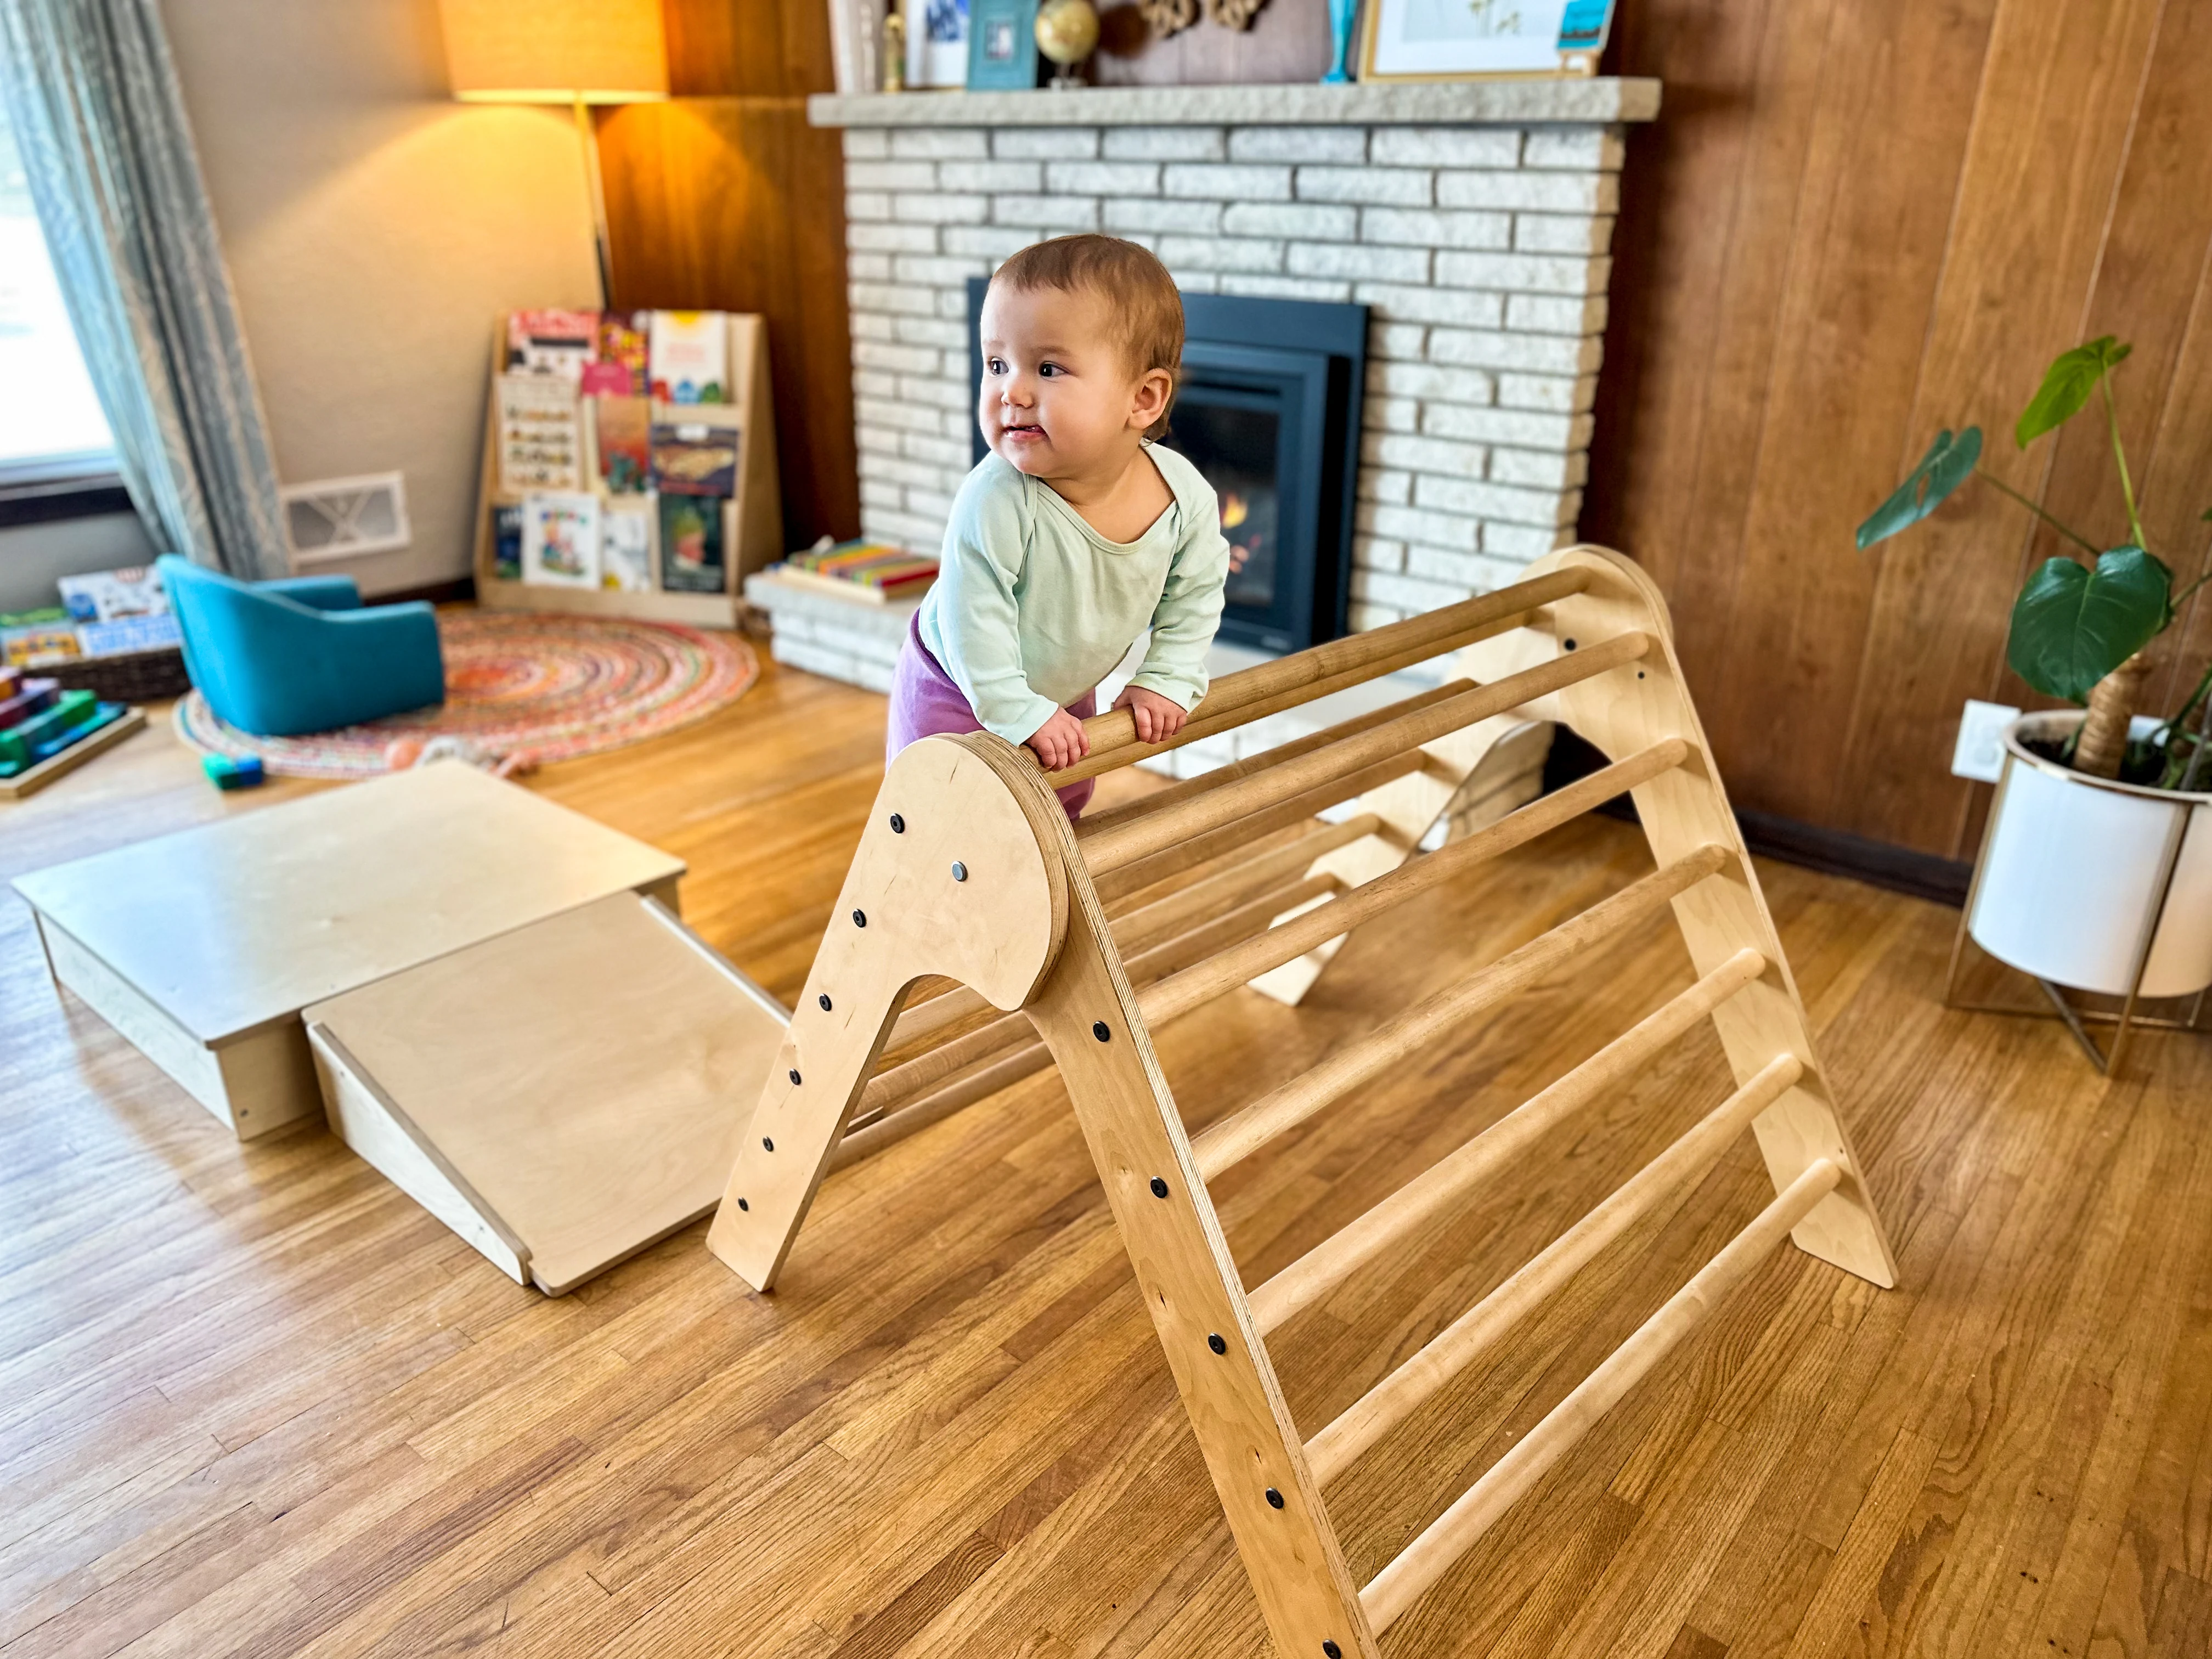 11-month-old Montessori baby climbs half way up a Pikler Triangle in her Montessori home. A Pikler ramp and platform can be seen in the background with a child friendly reading area.